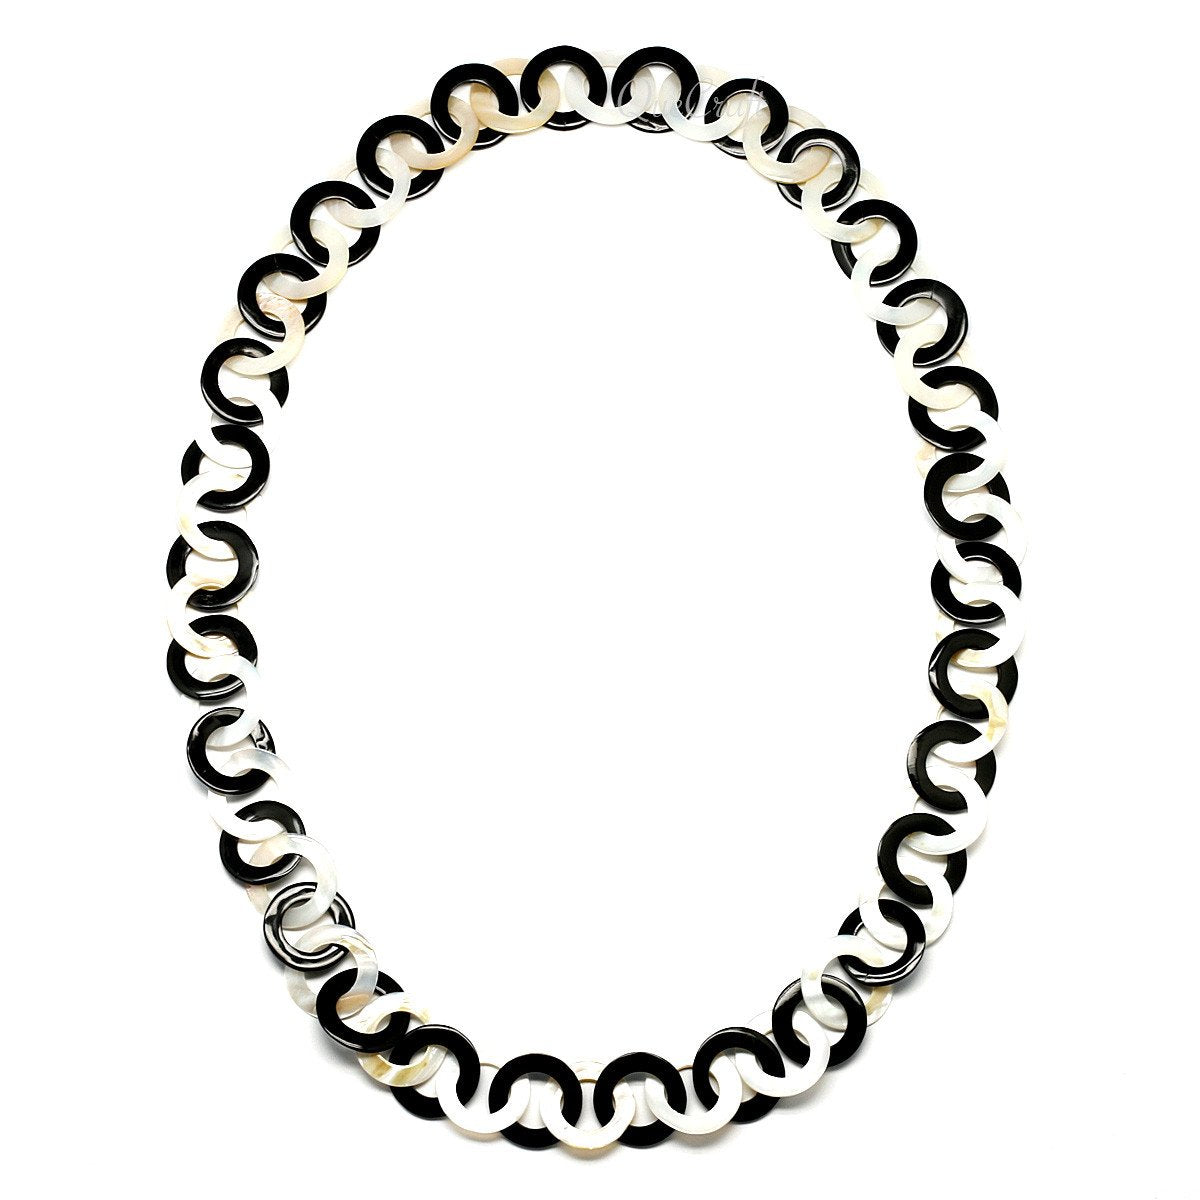 Horn & Shell Necklace #9684 - HORN JEWELRY